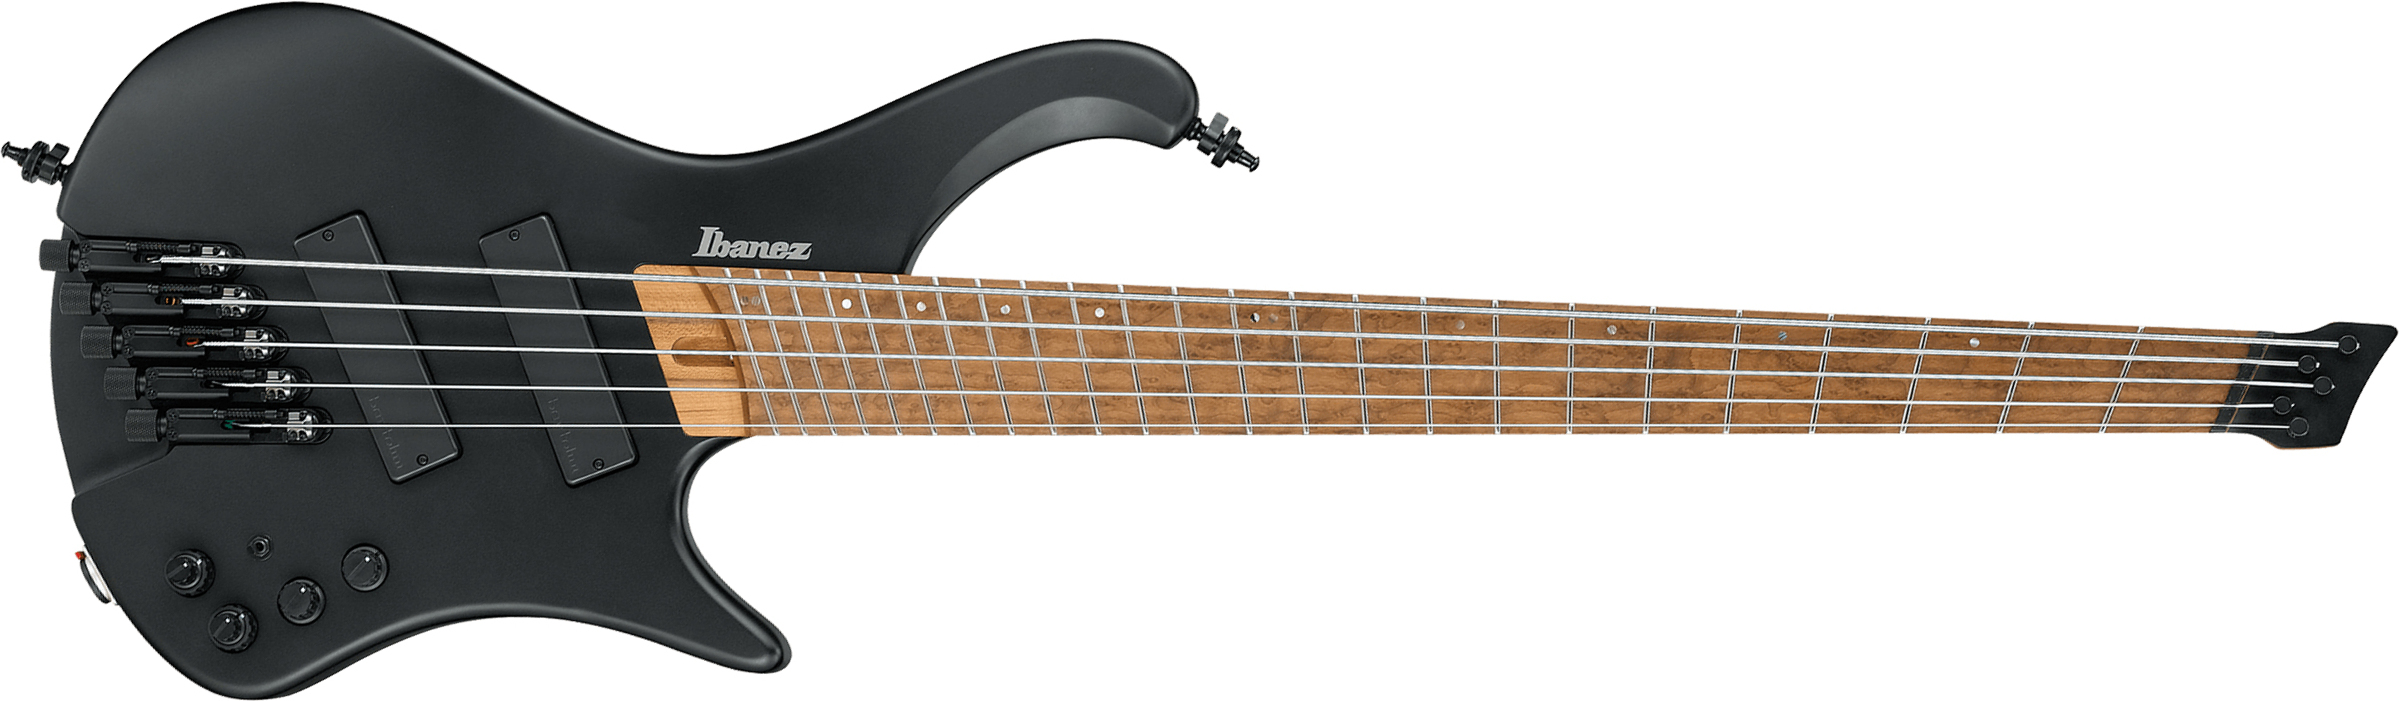 Ibanez Ehb1005ms Bkf Workshop 5c Multiscale Active Bartolini Mn - Black Flat - Solid body electric bass - Main picture